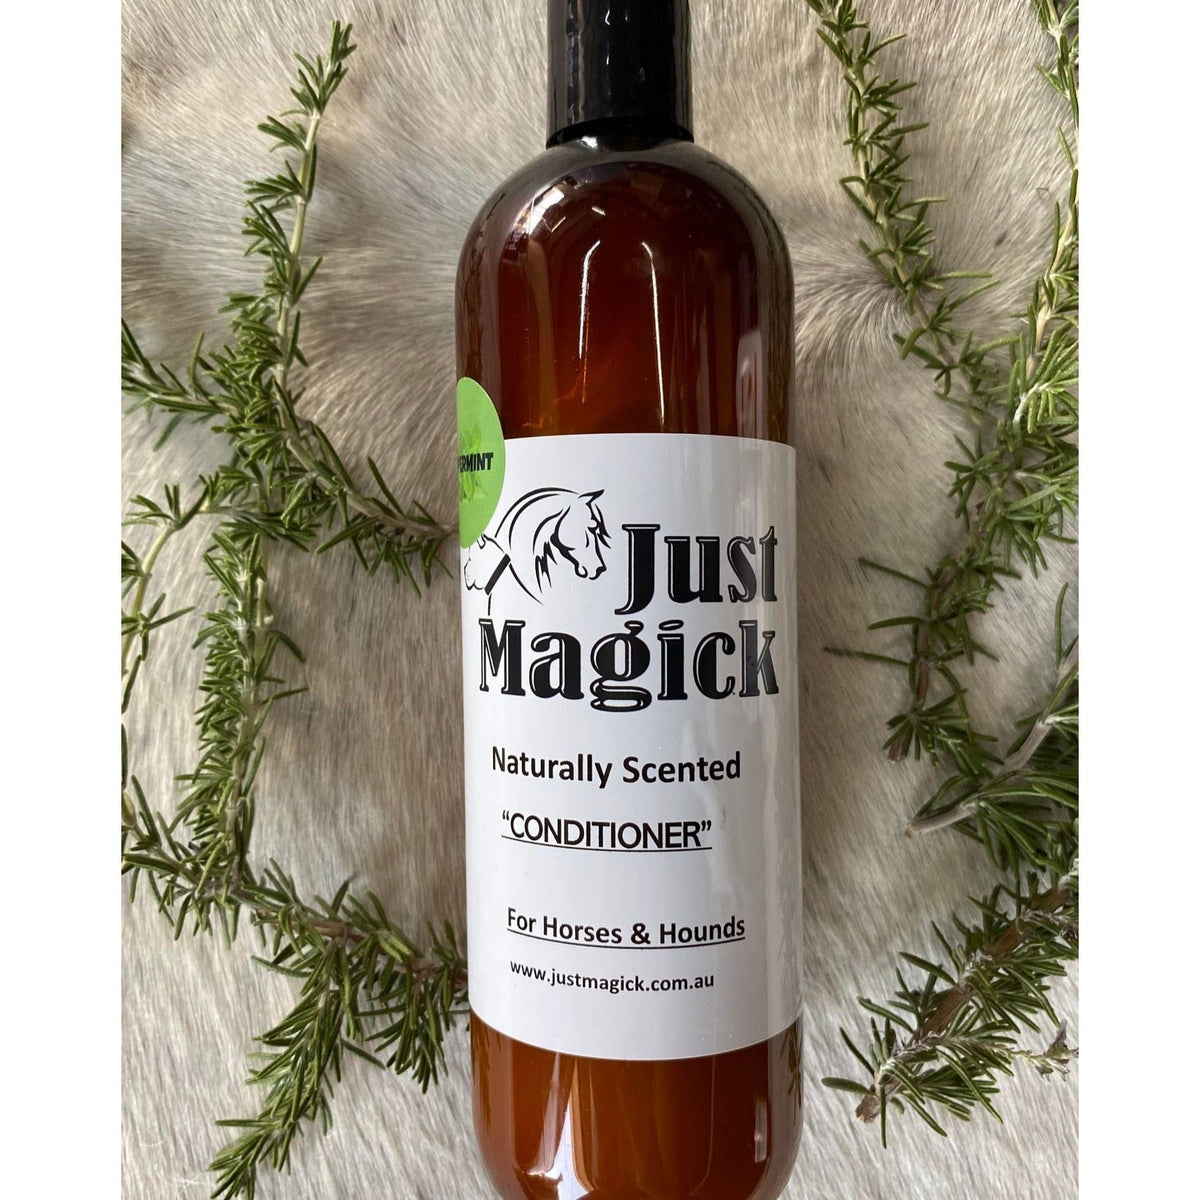 JUST MAGICK STABLE SUPPLIES 500ML Just Magick Peppermint Conditioner